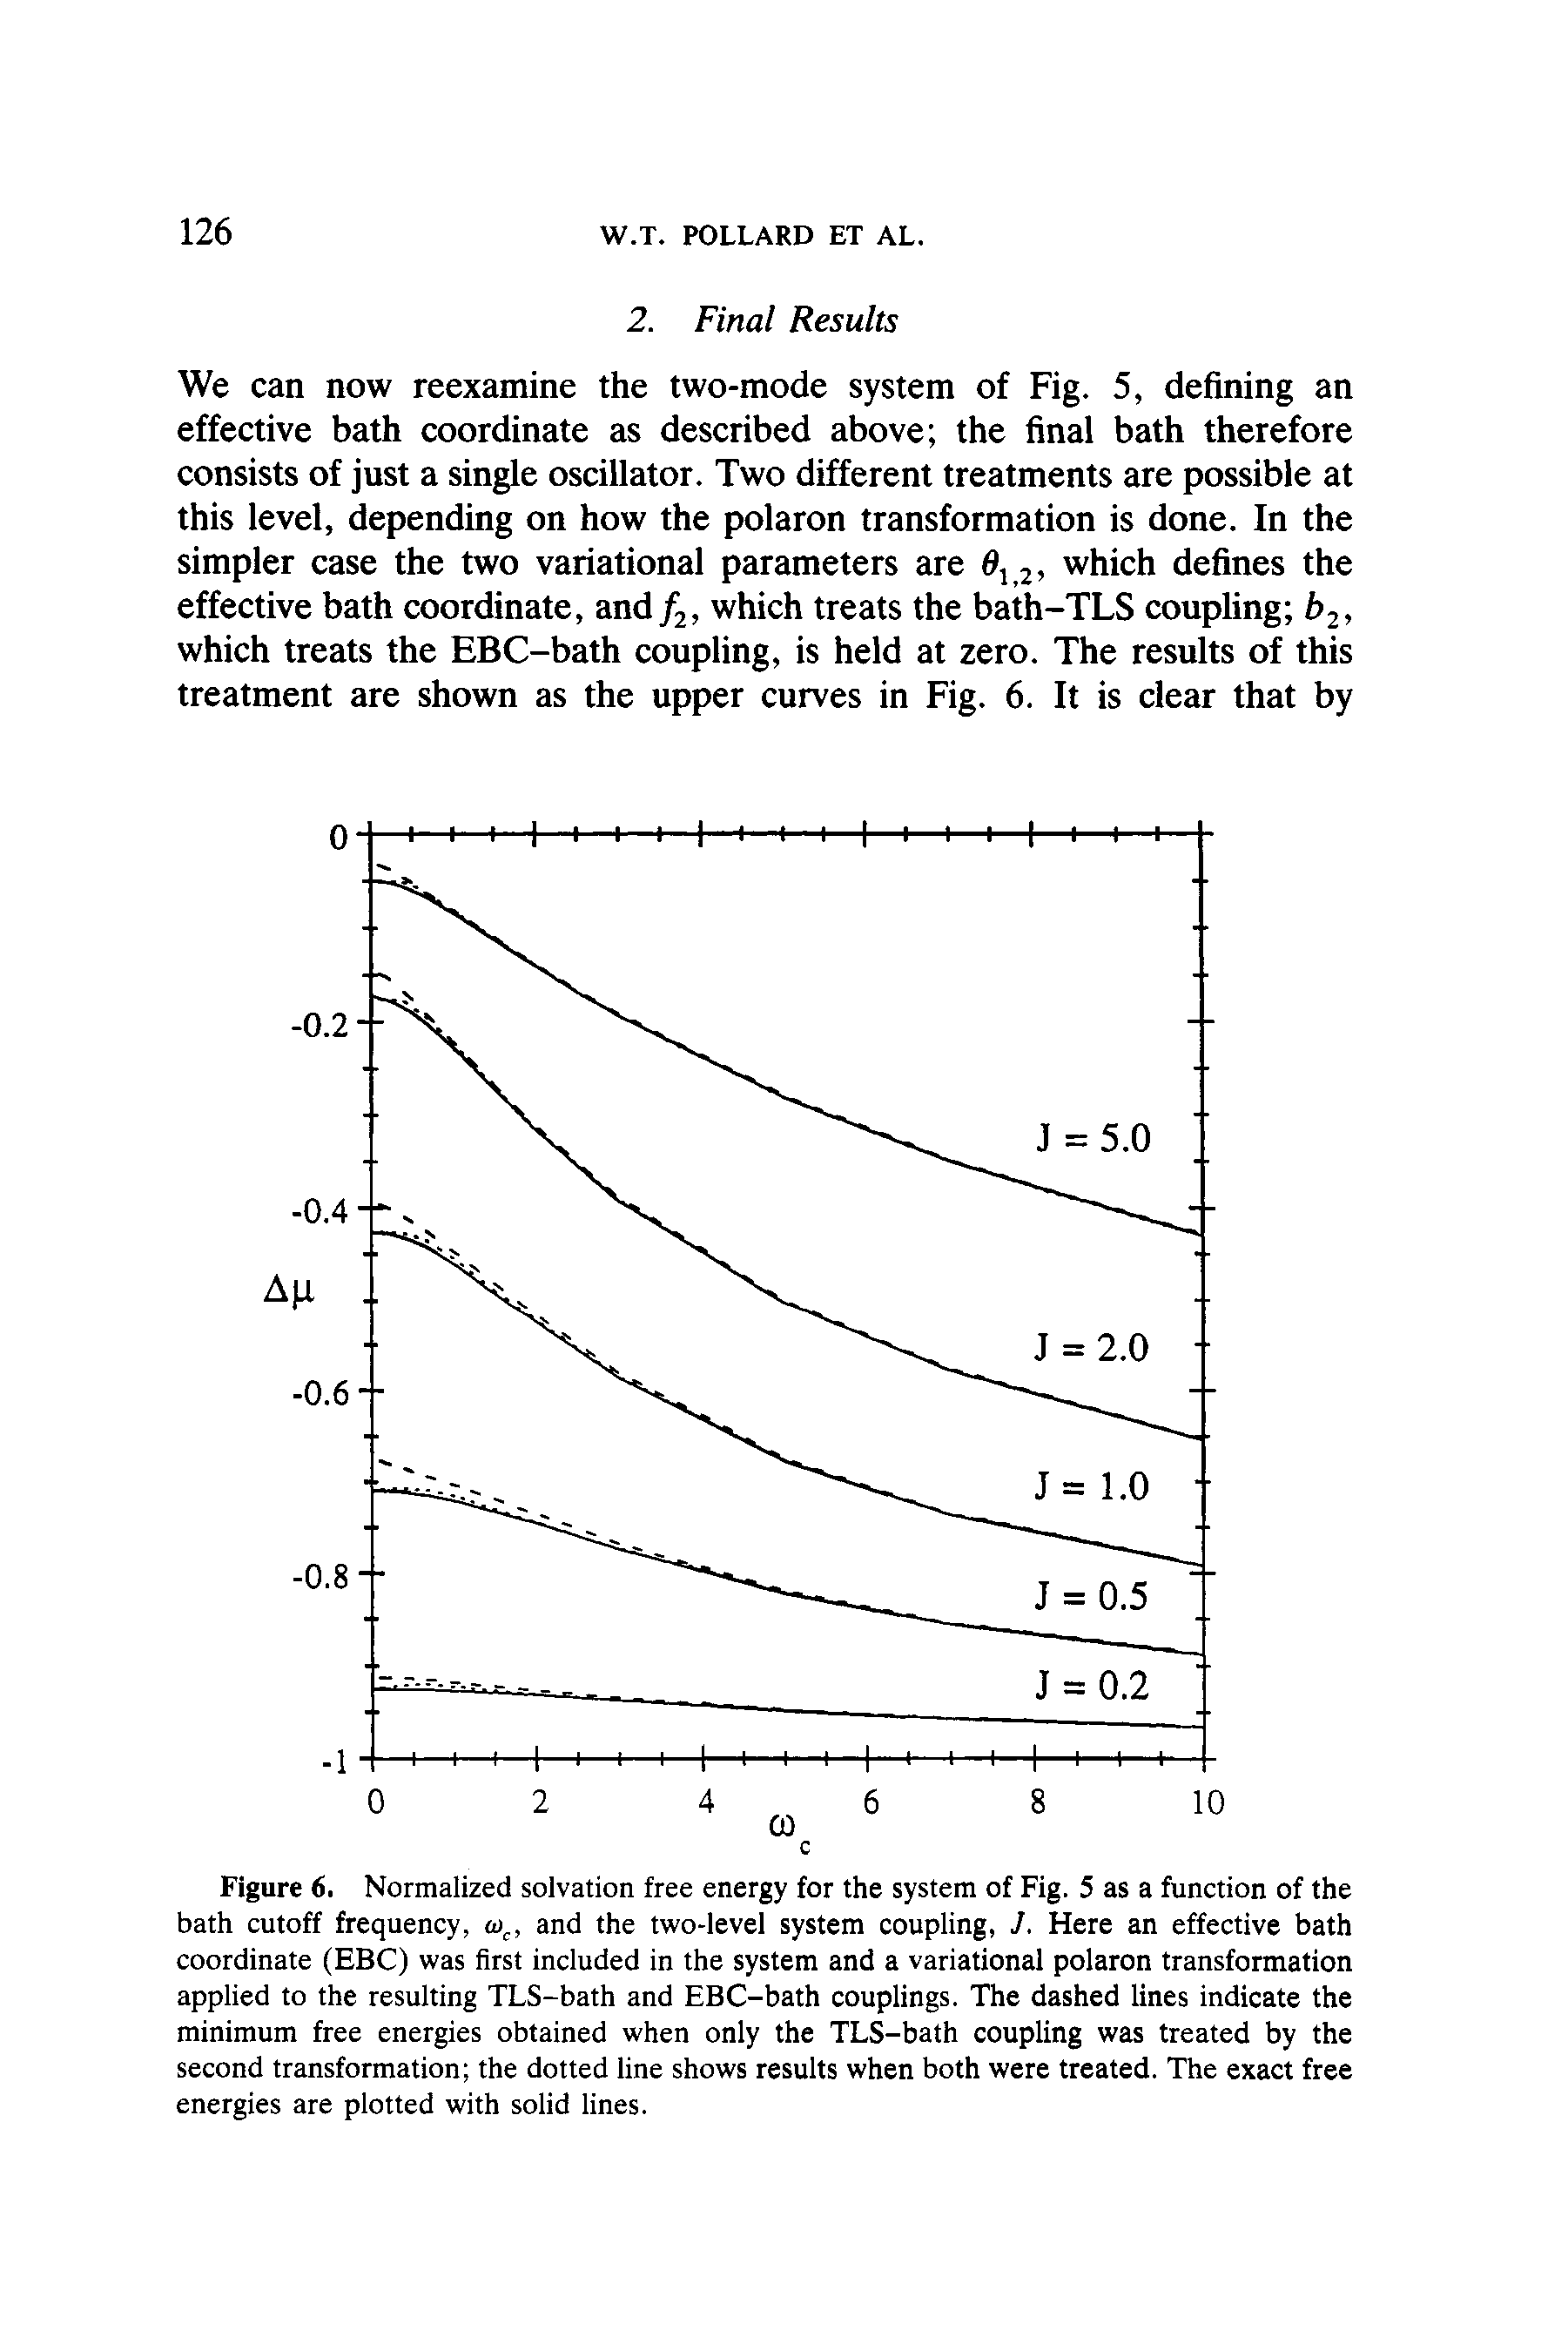 Figure 6, Normalized solvation free energy for the system of Fig. 5 as a function of the bath cutoff frequency, oi, and the two-level system coupling, J. Here an effective bath coordinate (EBC) was first included in the system and a variational polaron transformation applied to the resulting TLS-bath and EBC-bath couplings. The dashed lines indicate the minimum free energies obtained when only the TLS-bath coupling was treated by the second transformation the dotted line shows results when both were treated. The exact free energies are plotted with solid lines.